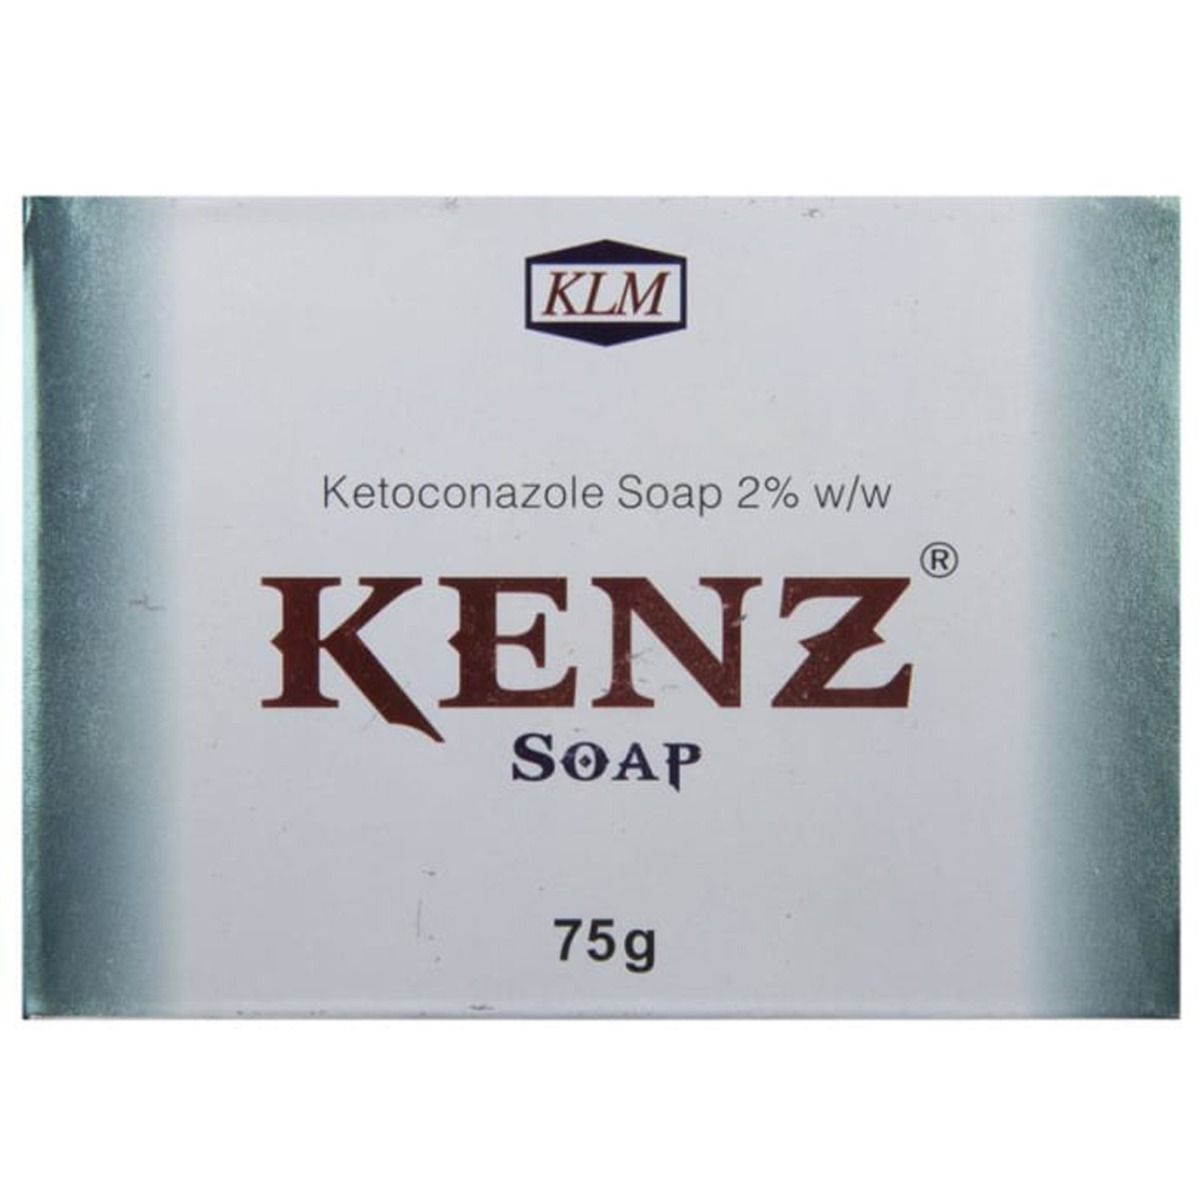 Kenz Soap, 75 gm Price, Uses, Side Effects, Composition - Apollo Pharmacy